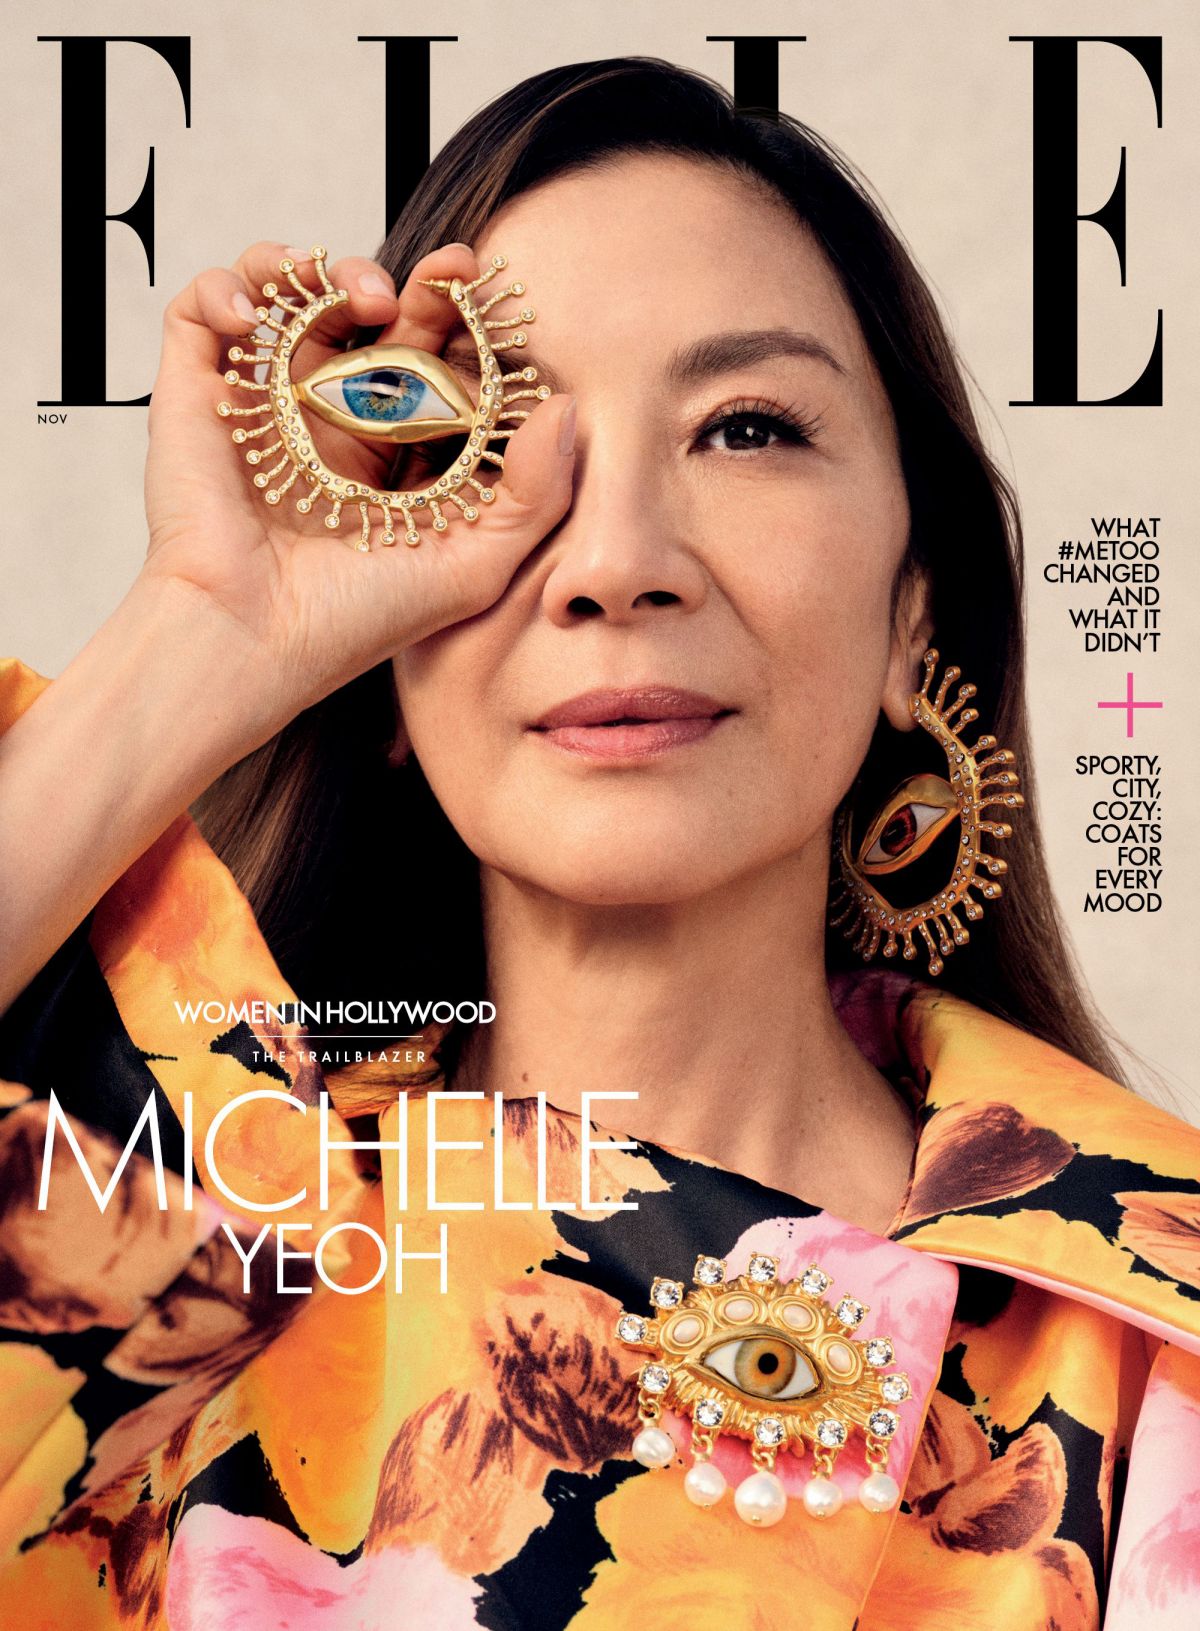 Michelle Yeoh Photoshoot in Elle Magazine The Women in Hollywood Issue, November 2022